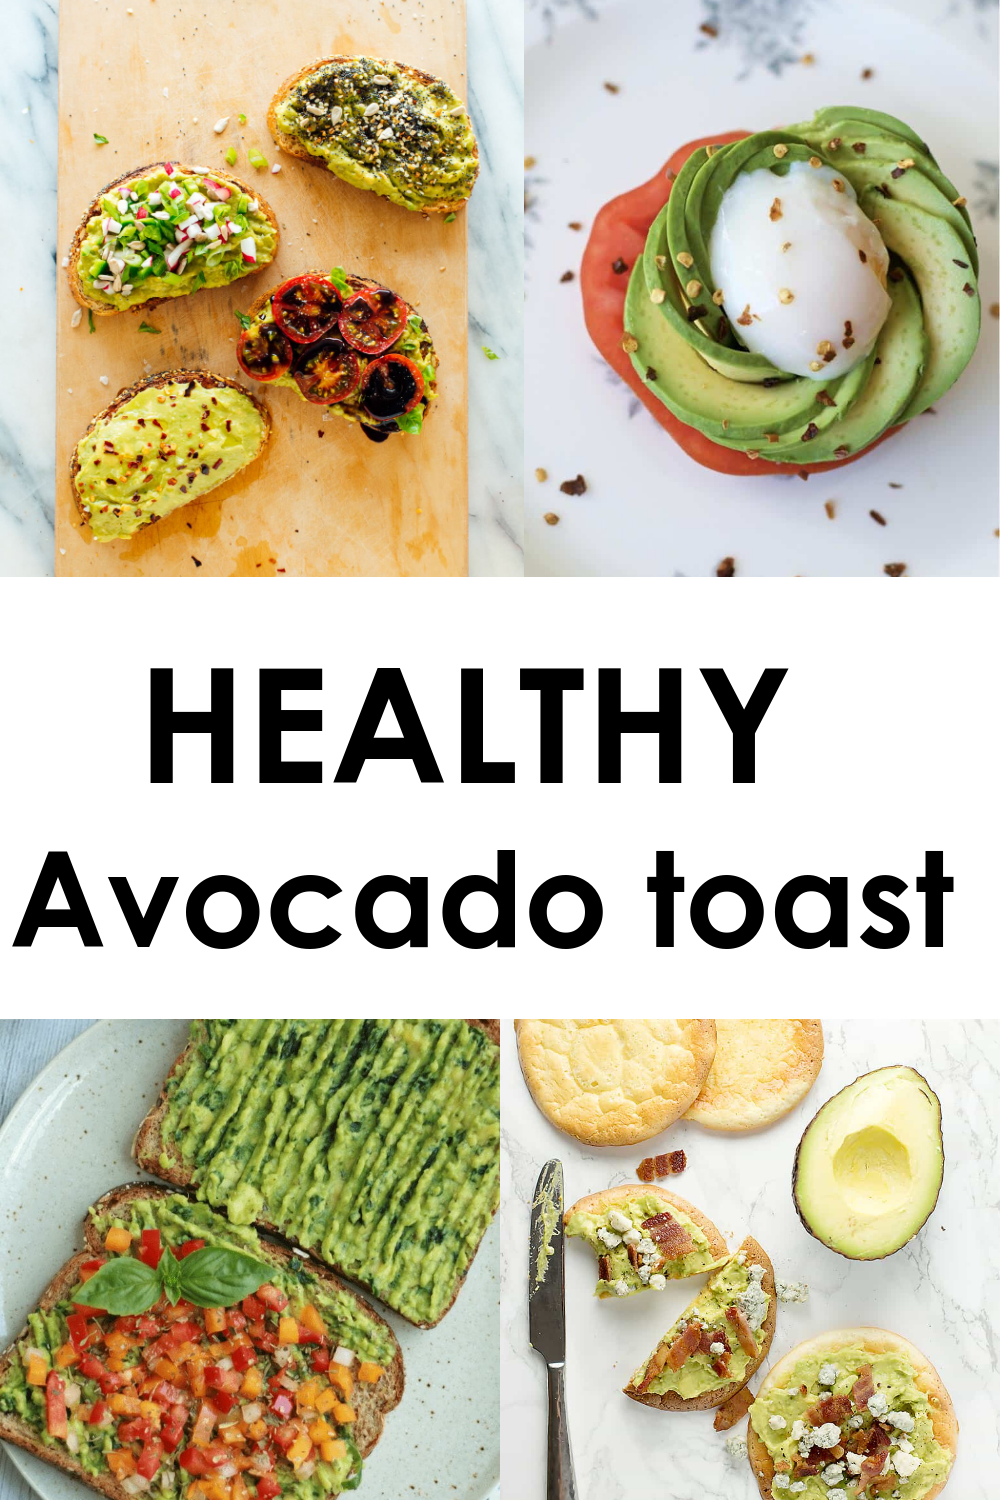 Here is an article with 15 best simple, avocado toast ideas some have eggs, others are vegan, clean eating, #avocadotoast #toast #avocado #food #lunch #dinner #breakfastideas 